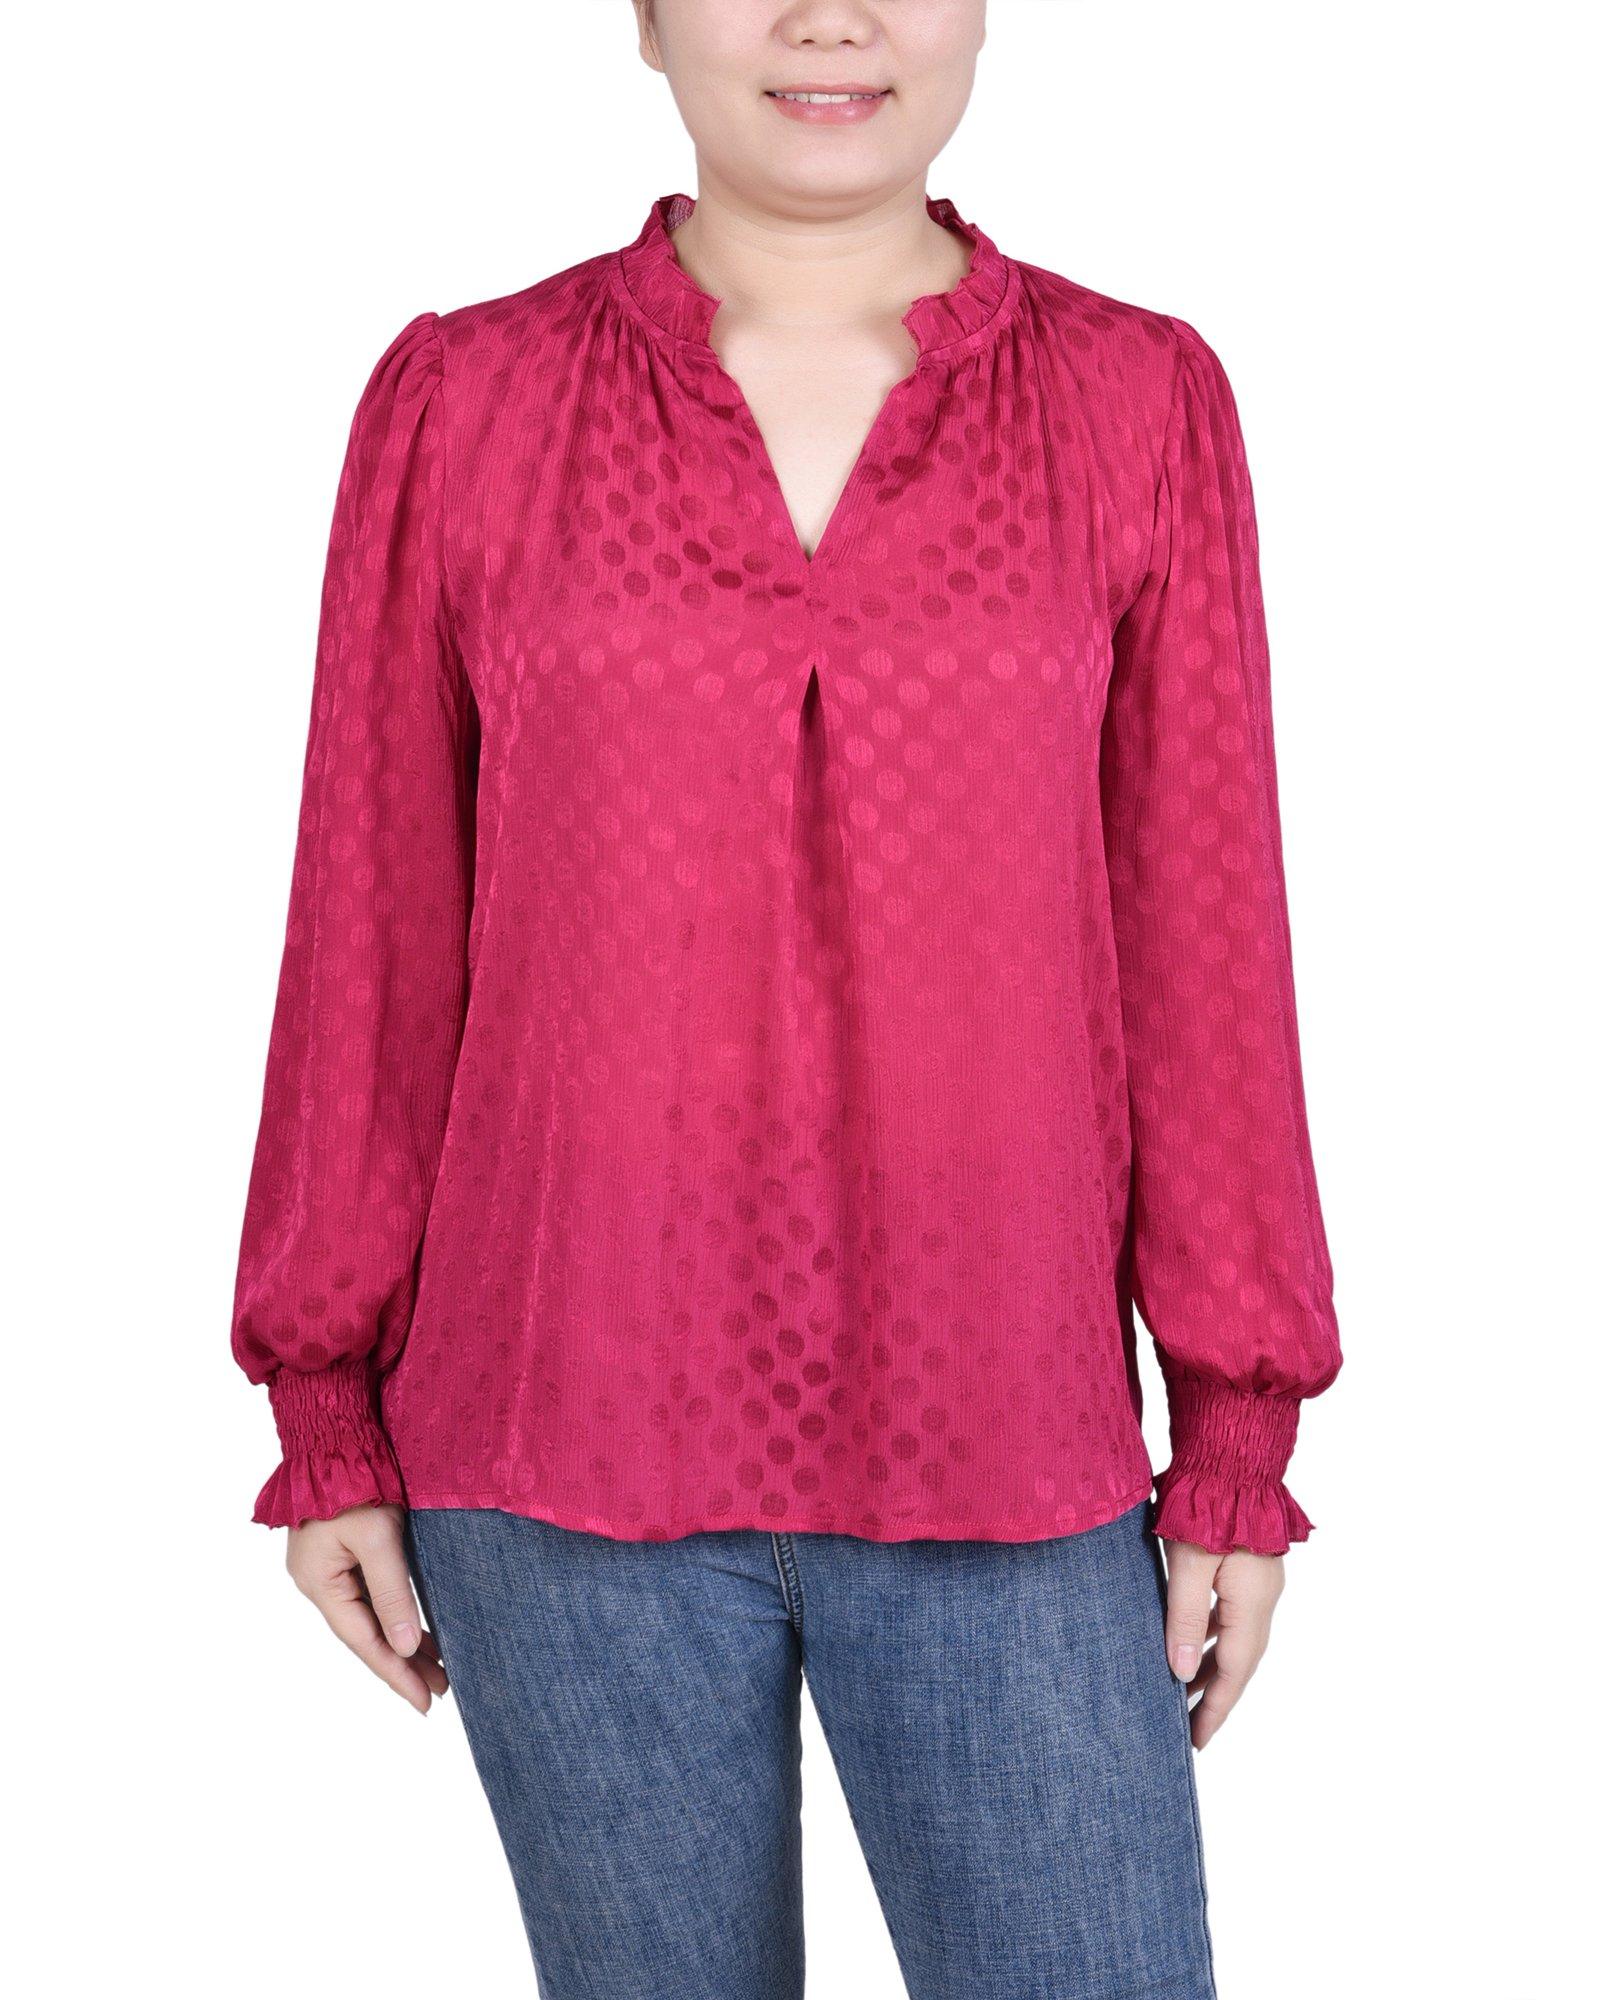 s Womens Long Sleeve Smocked Cuff Blouse